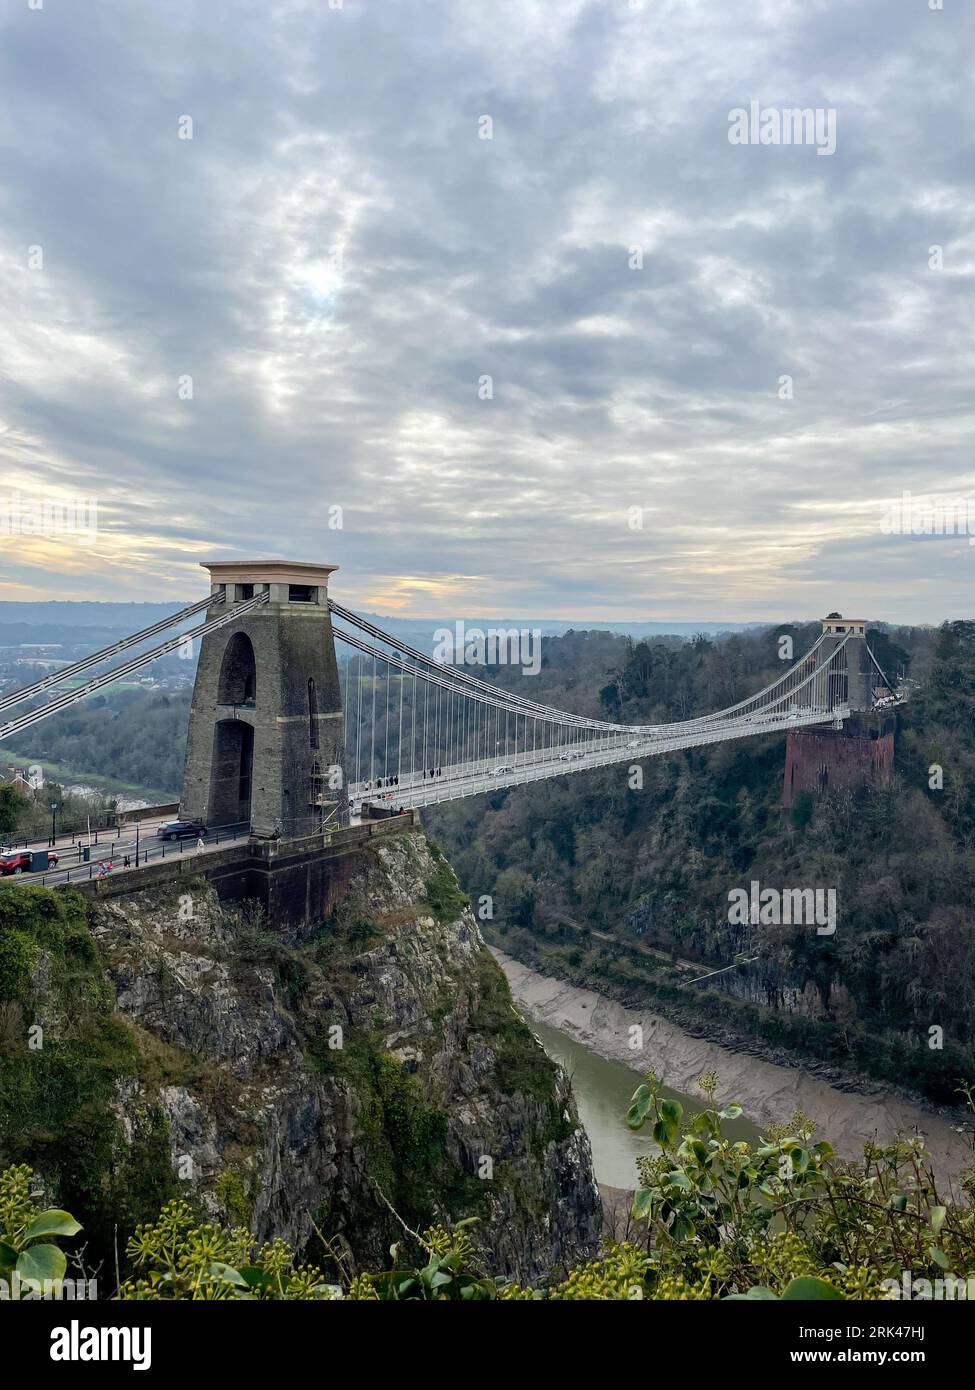 A stunning landscape featuring a suspension bridge spanning a river between hills and forests: Bristol suspension bridge Stock Photo